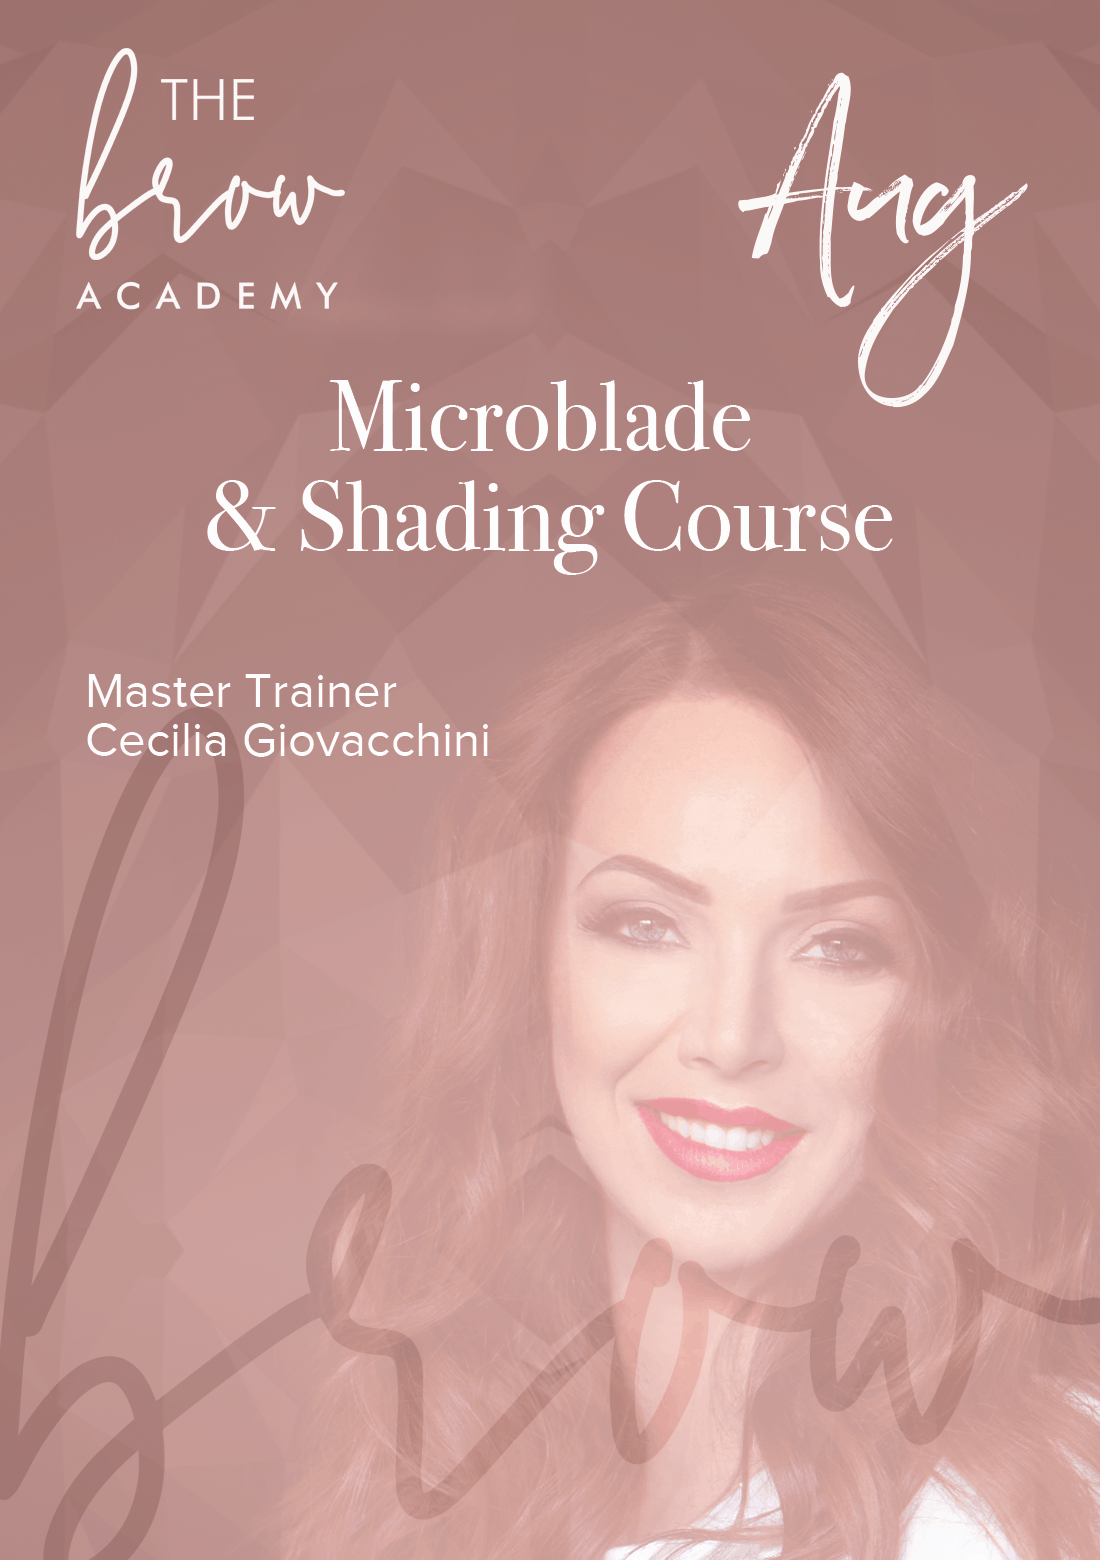 East Bay Microblading Courses - August